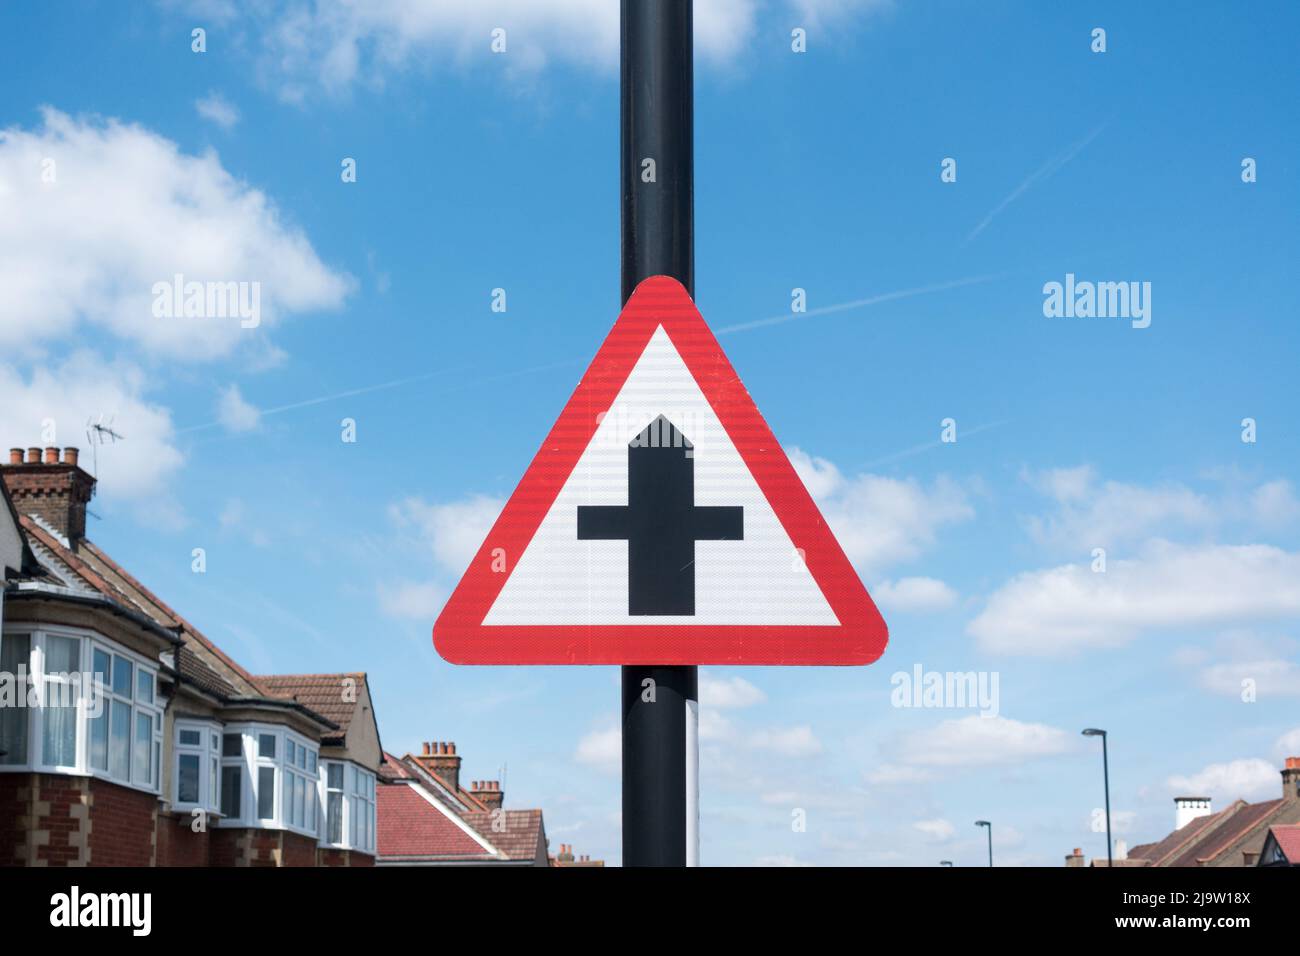 Crossroad warning sign on a lamppost in residential area in London Stock Photo